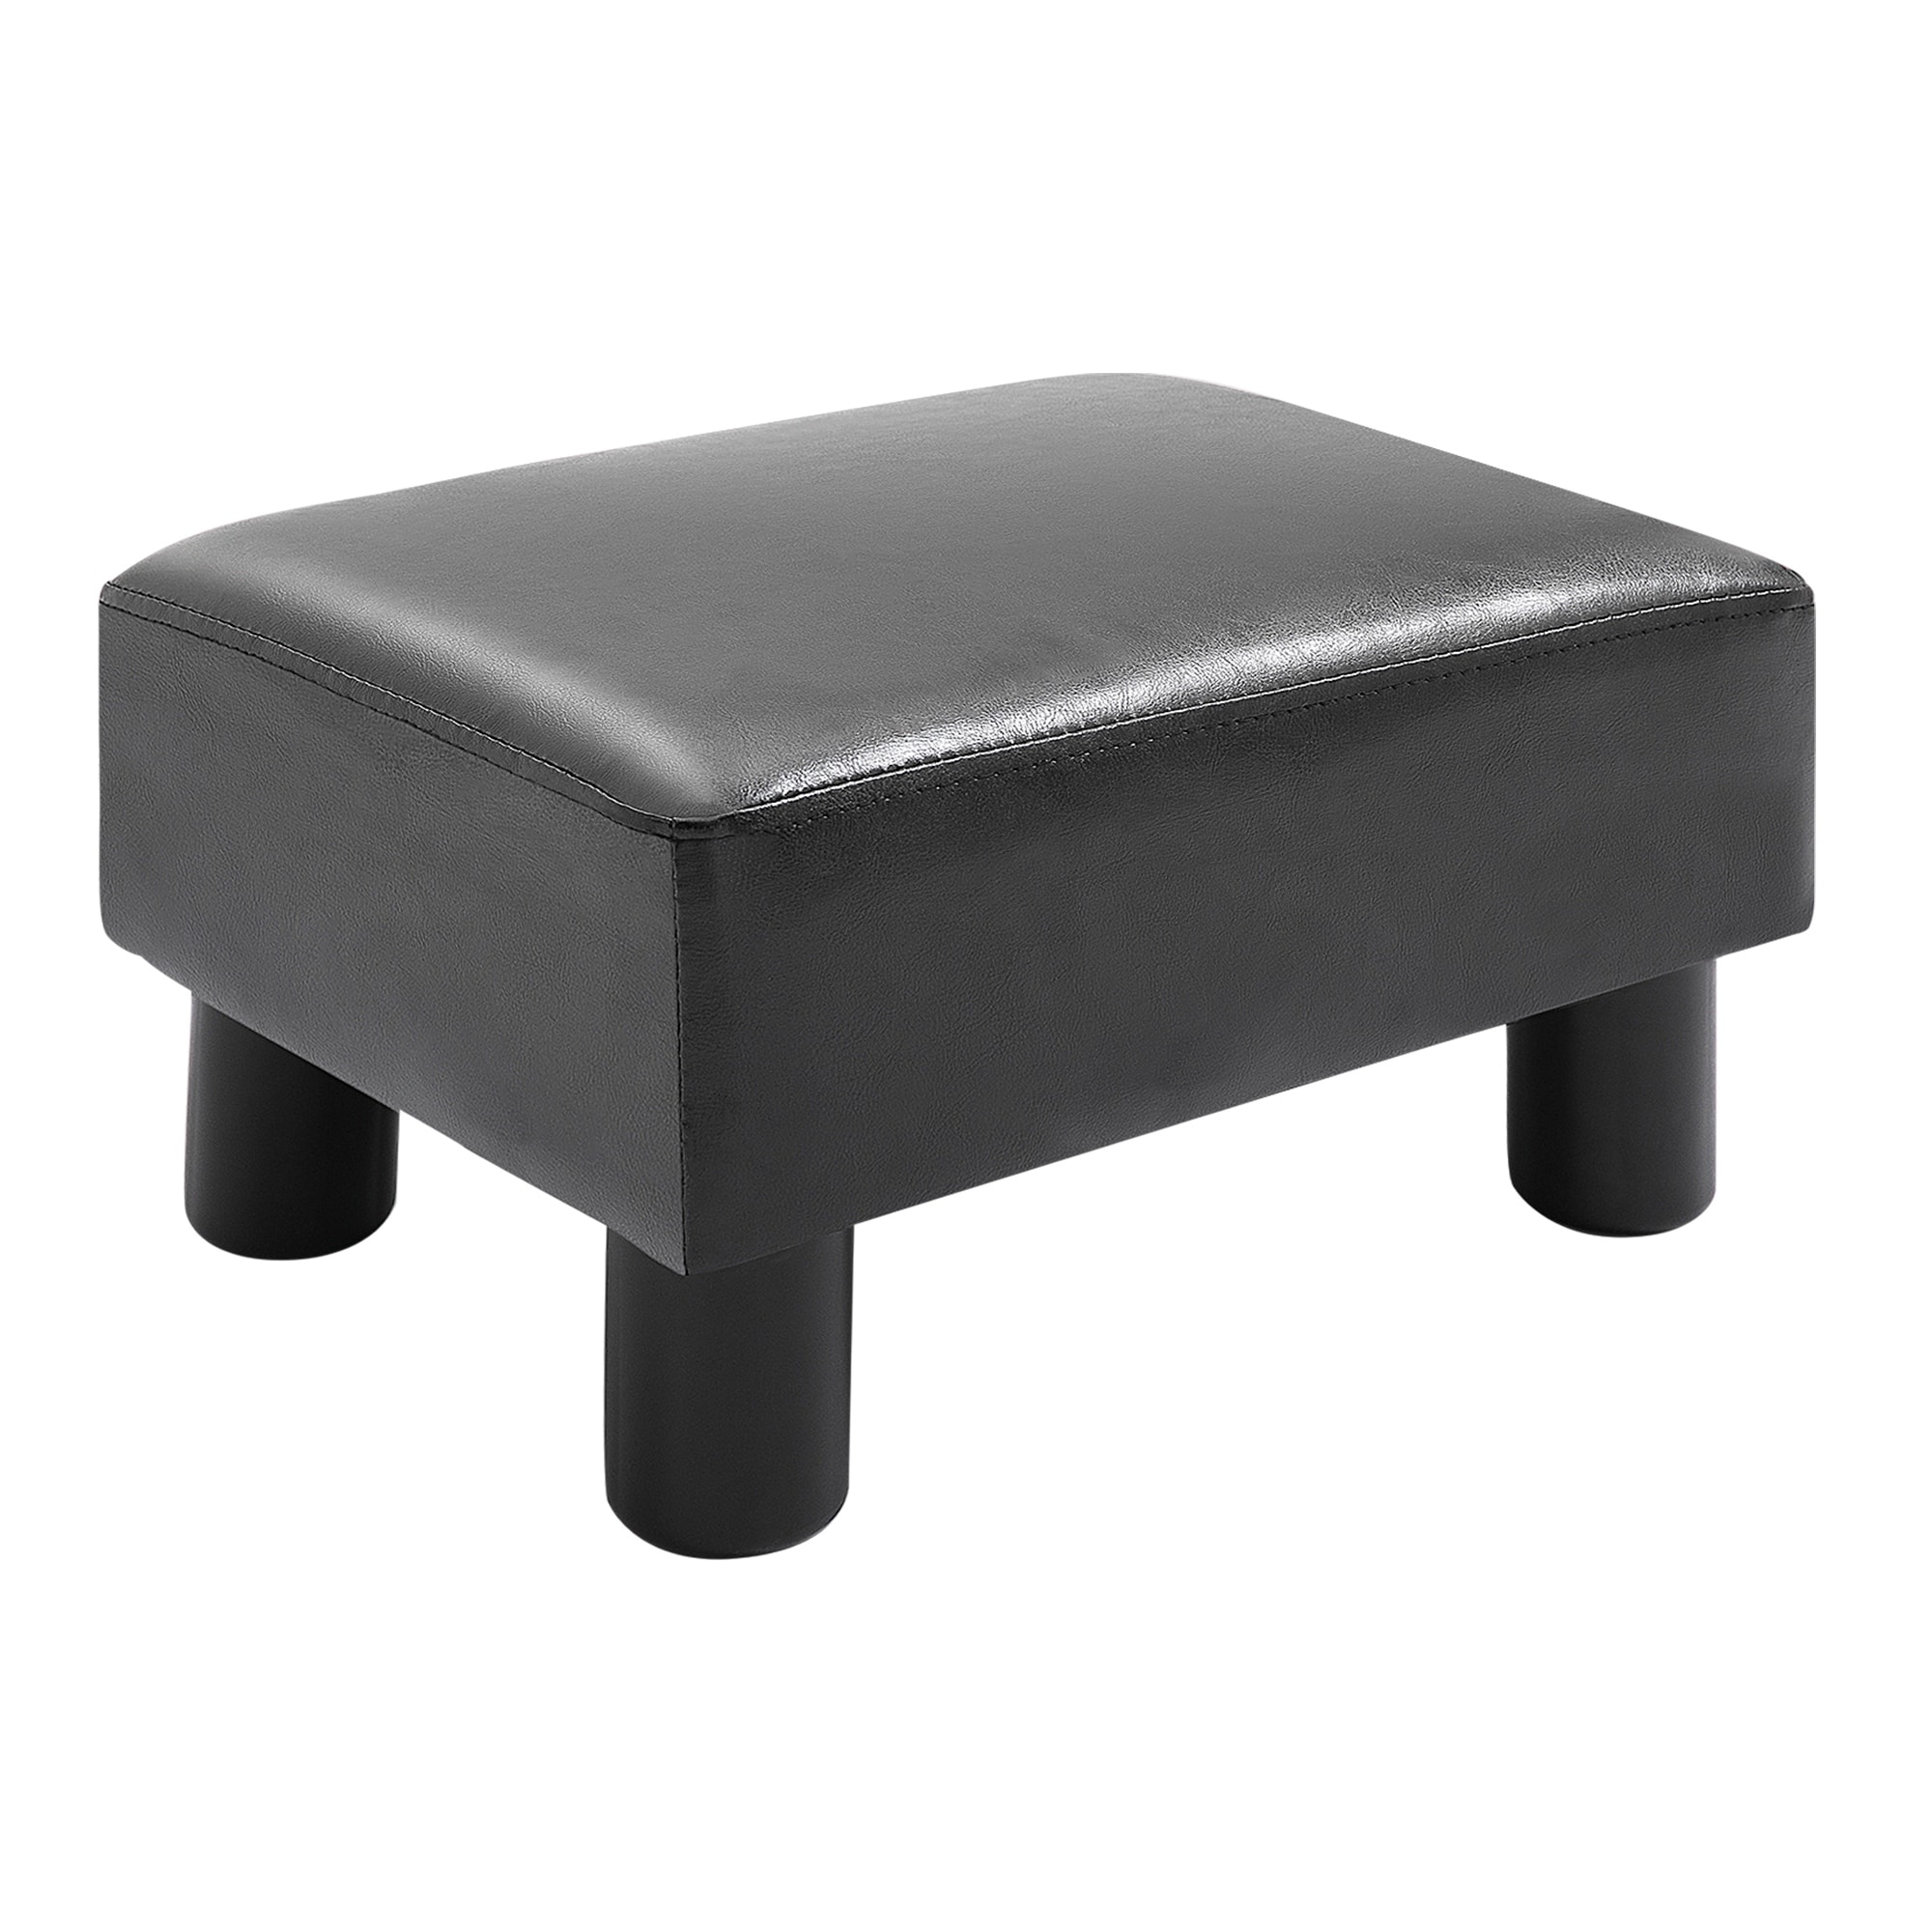 Grey SCRIPTRACT 6 Small Footstool PU Leather Ottoman Footrest Modern Home Living Room Bedroom Rectangular Stool with Padded Seat 